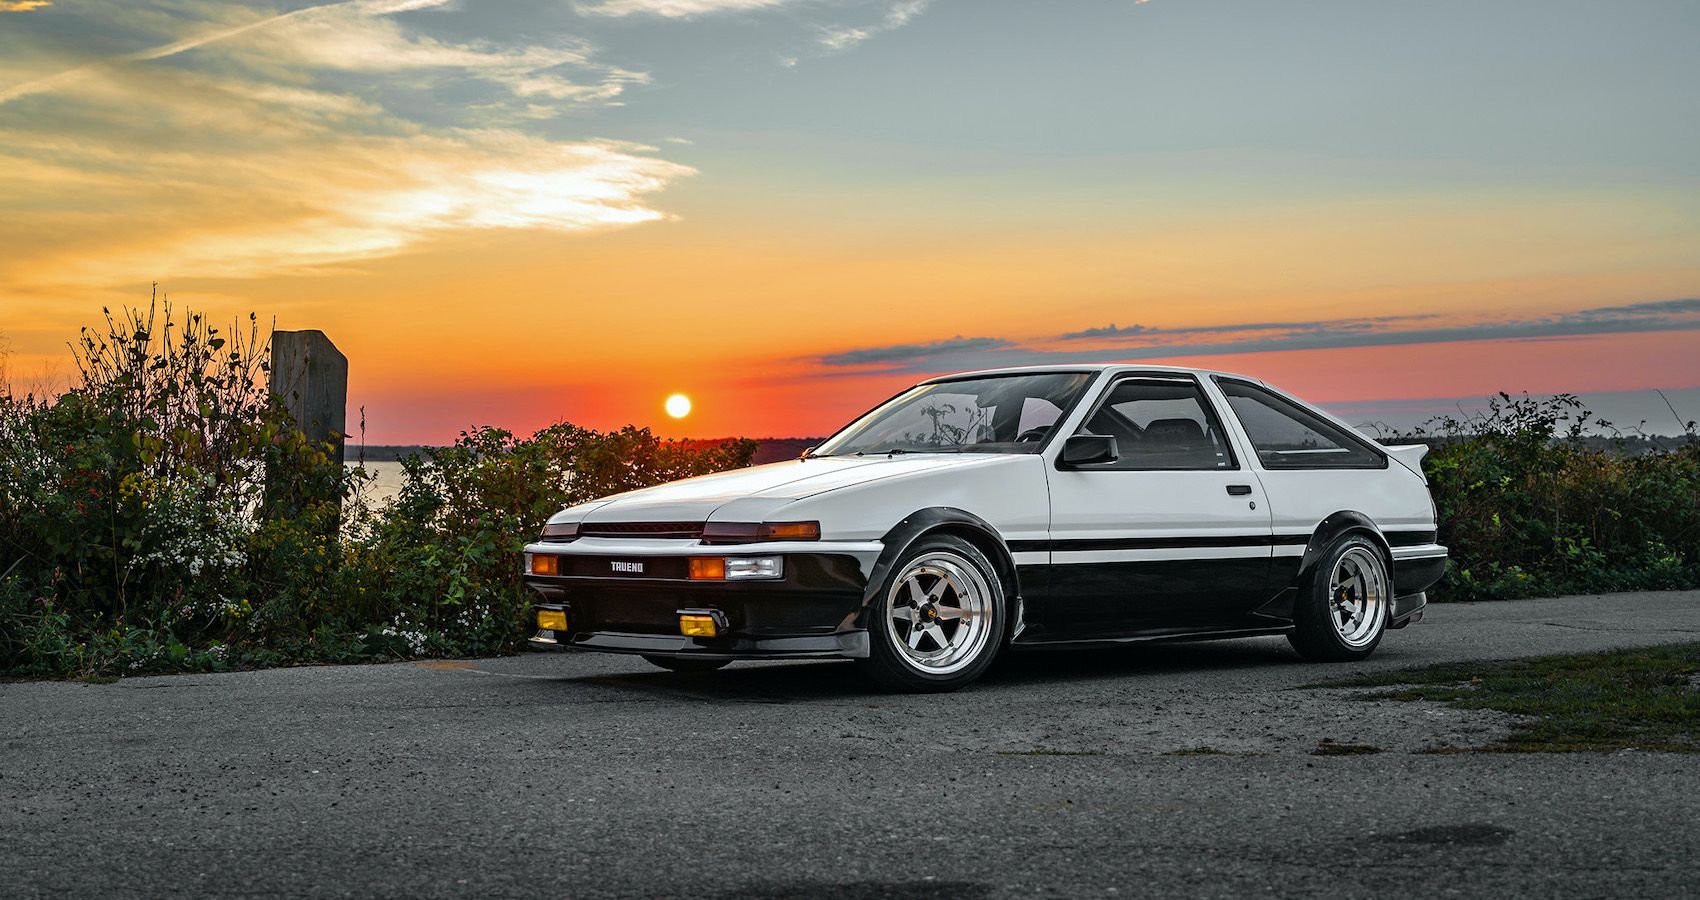 Toyota Corolla AE86 'Hachi-Roku' parked by the lake.